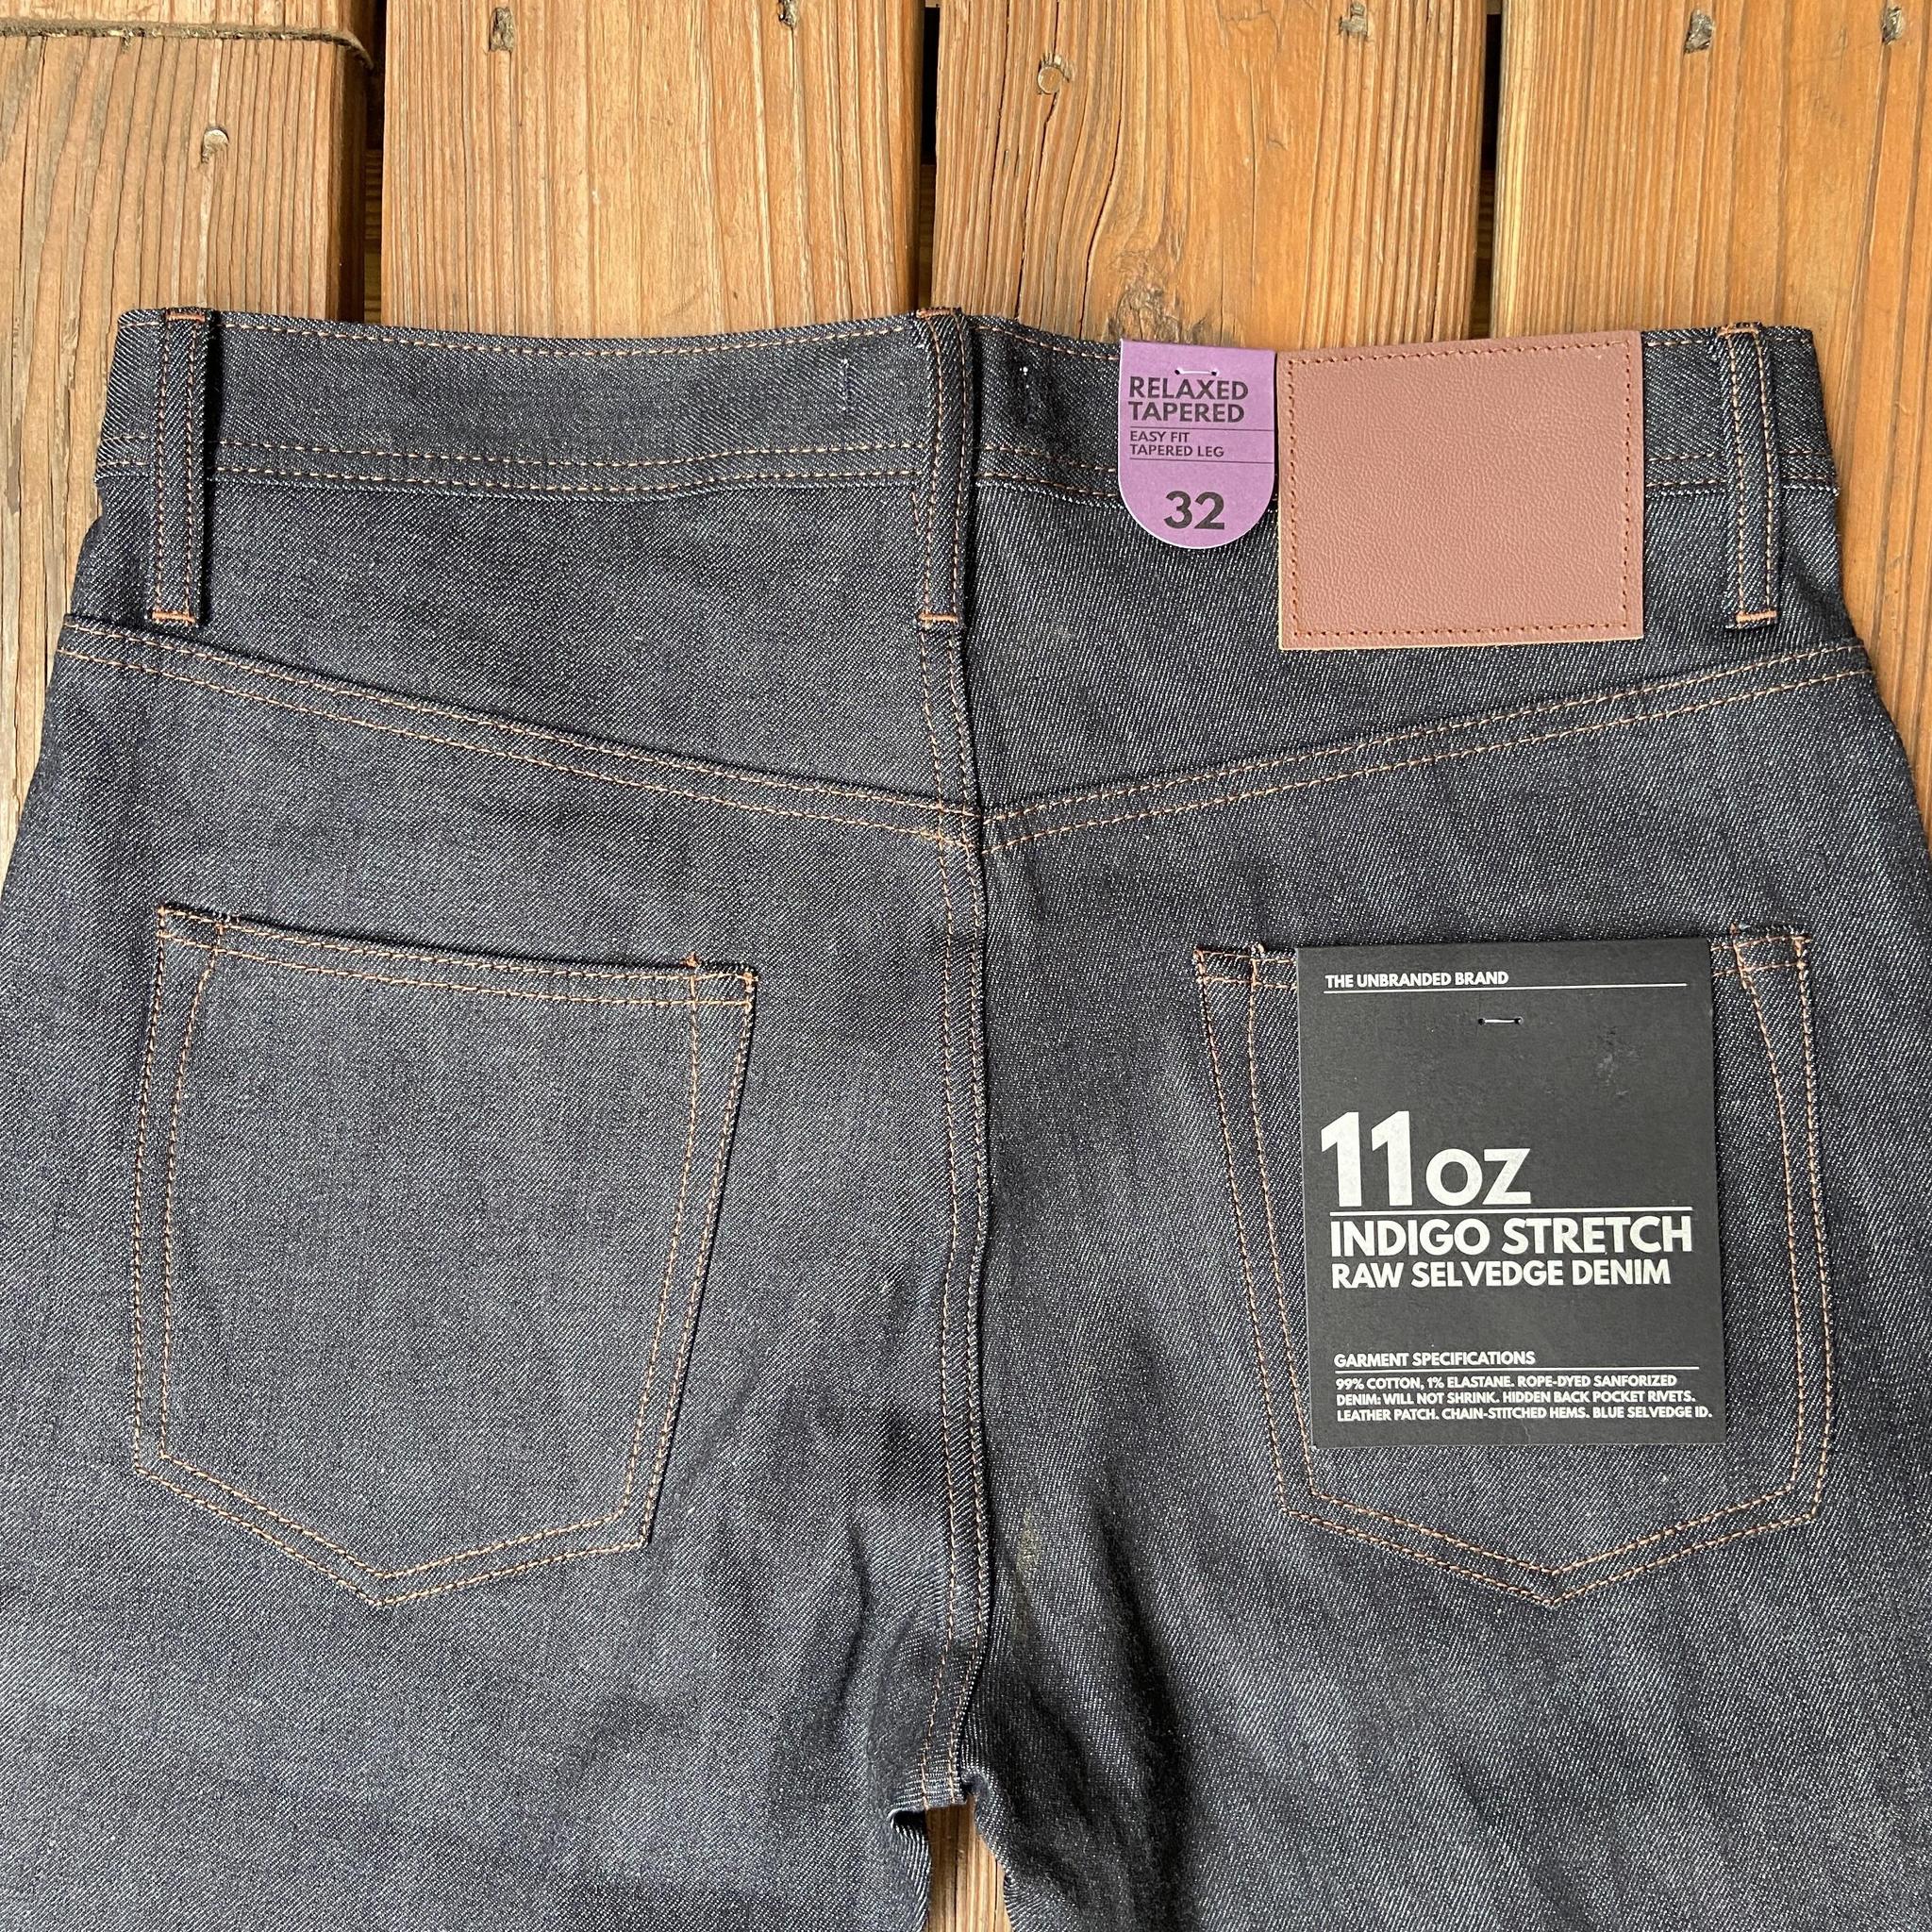 Unbranded 11oz. UB622 Relaxed Tapered Stretch Selvedge Denim